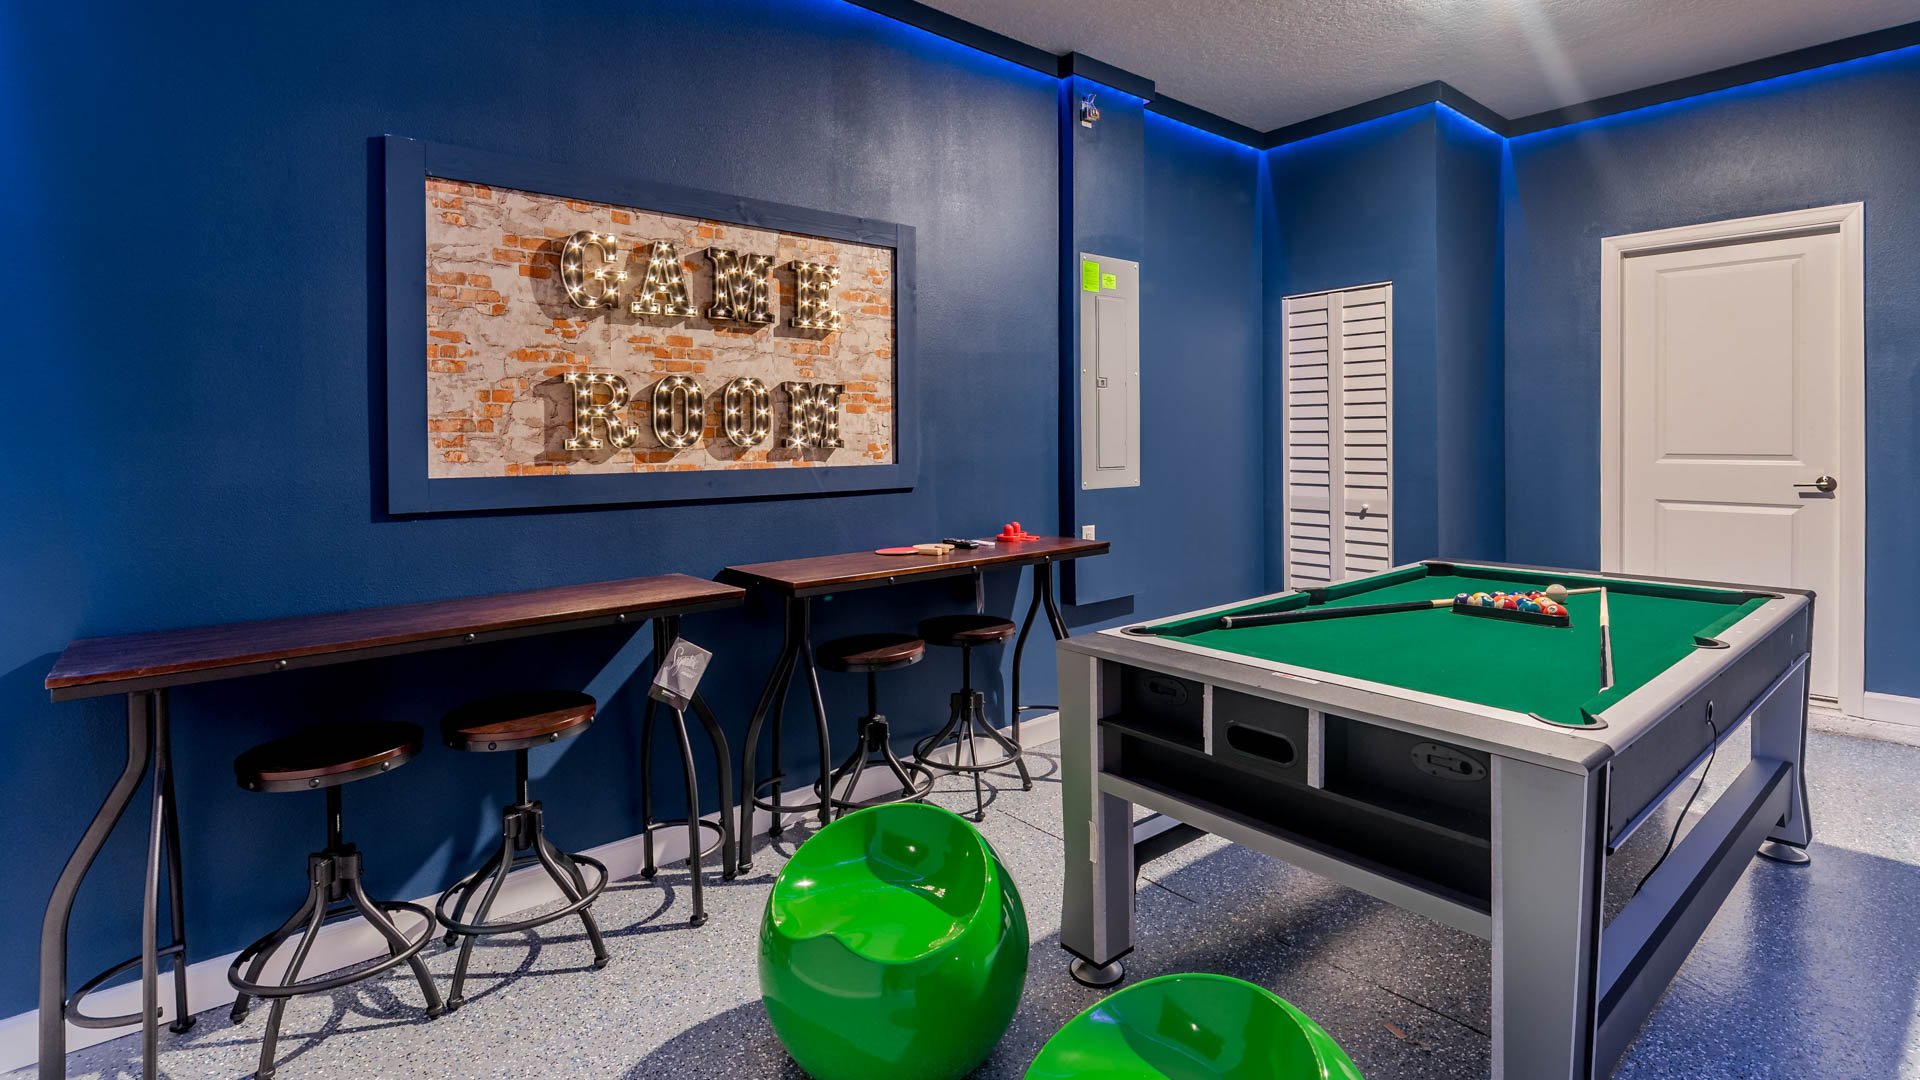 Game Room (Angle)Pool Table flips to Air Hockey.Also Has a ping pong table topper